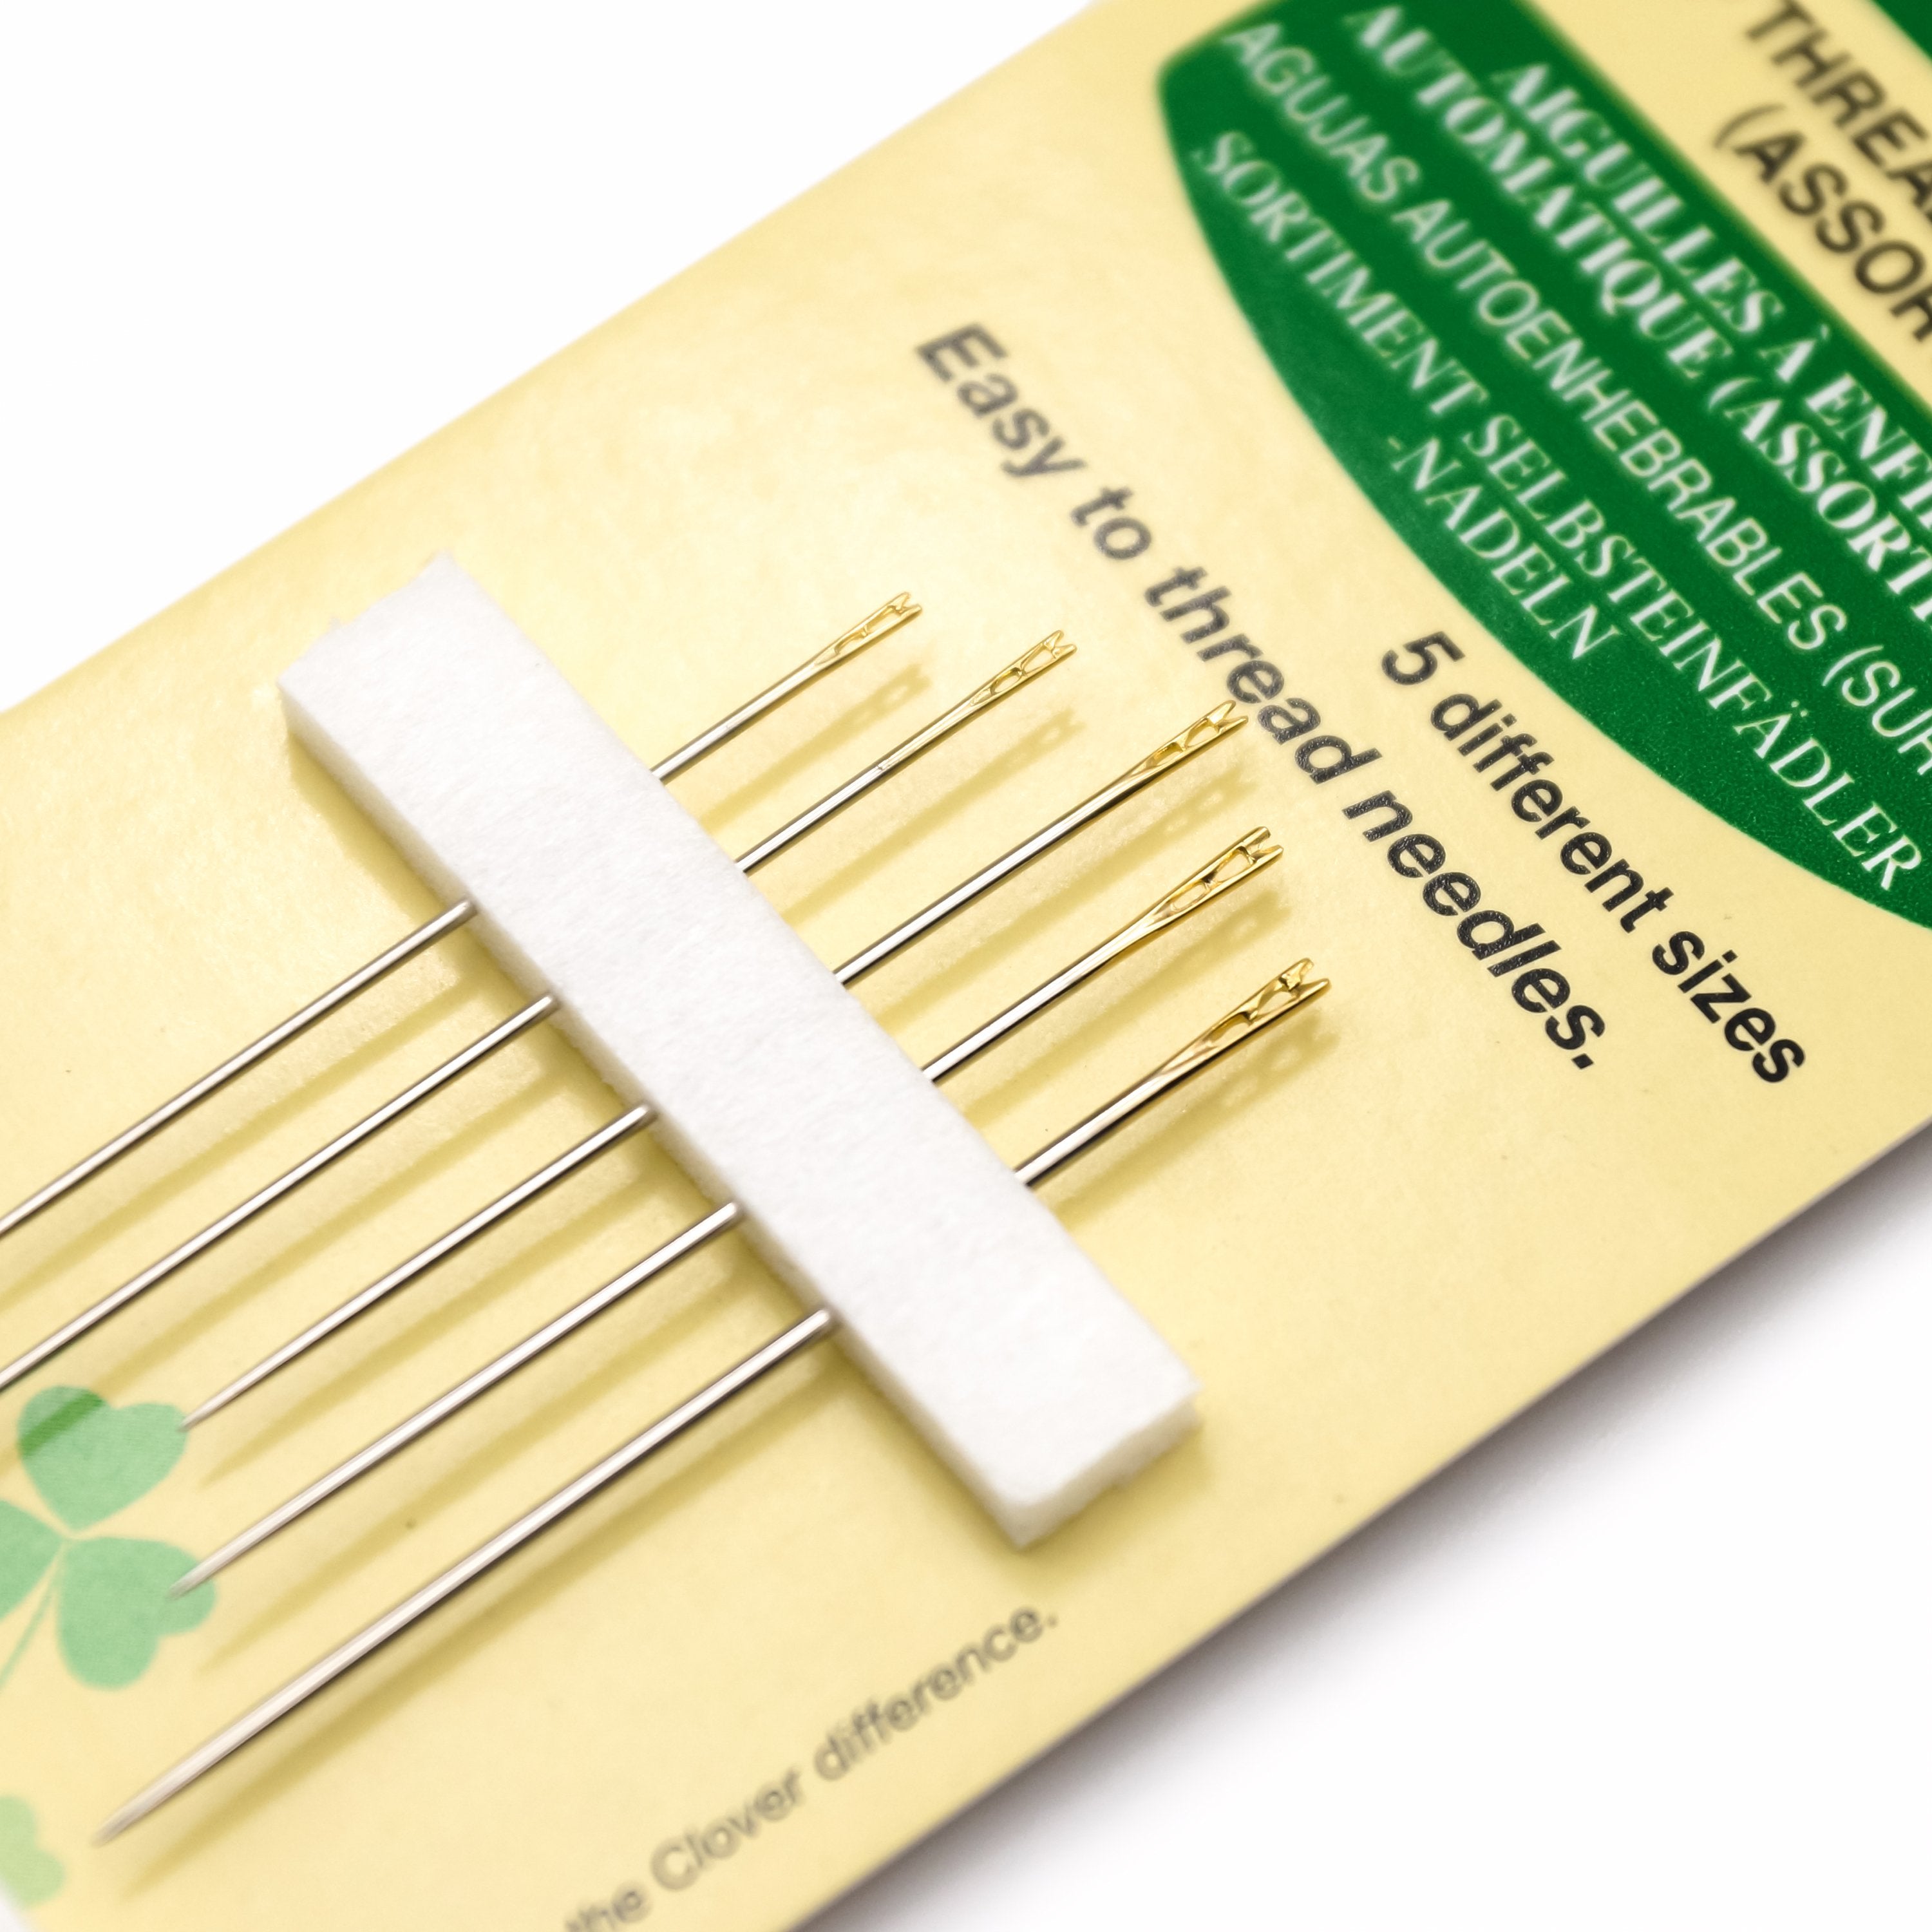 Self-Threading Needles - The Best Thing Since Sliced Bread